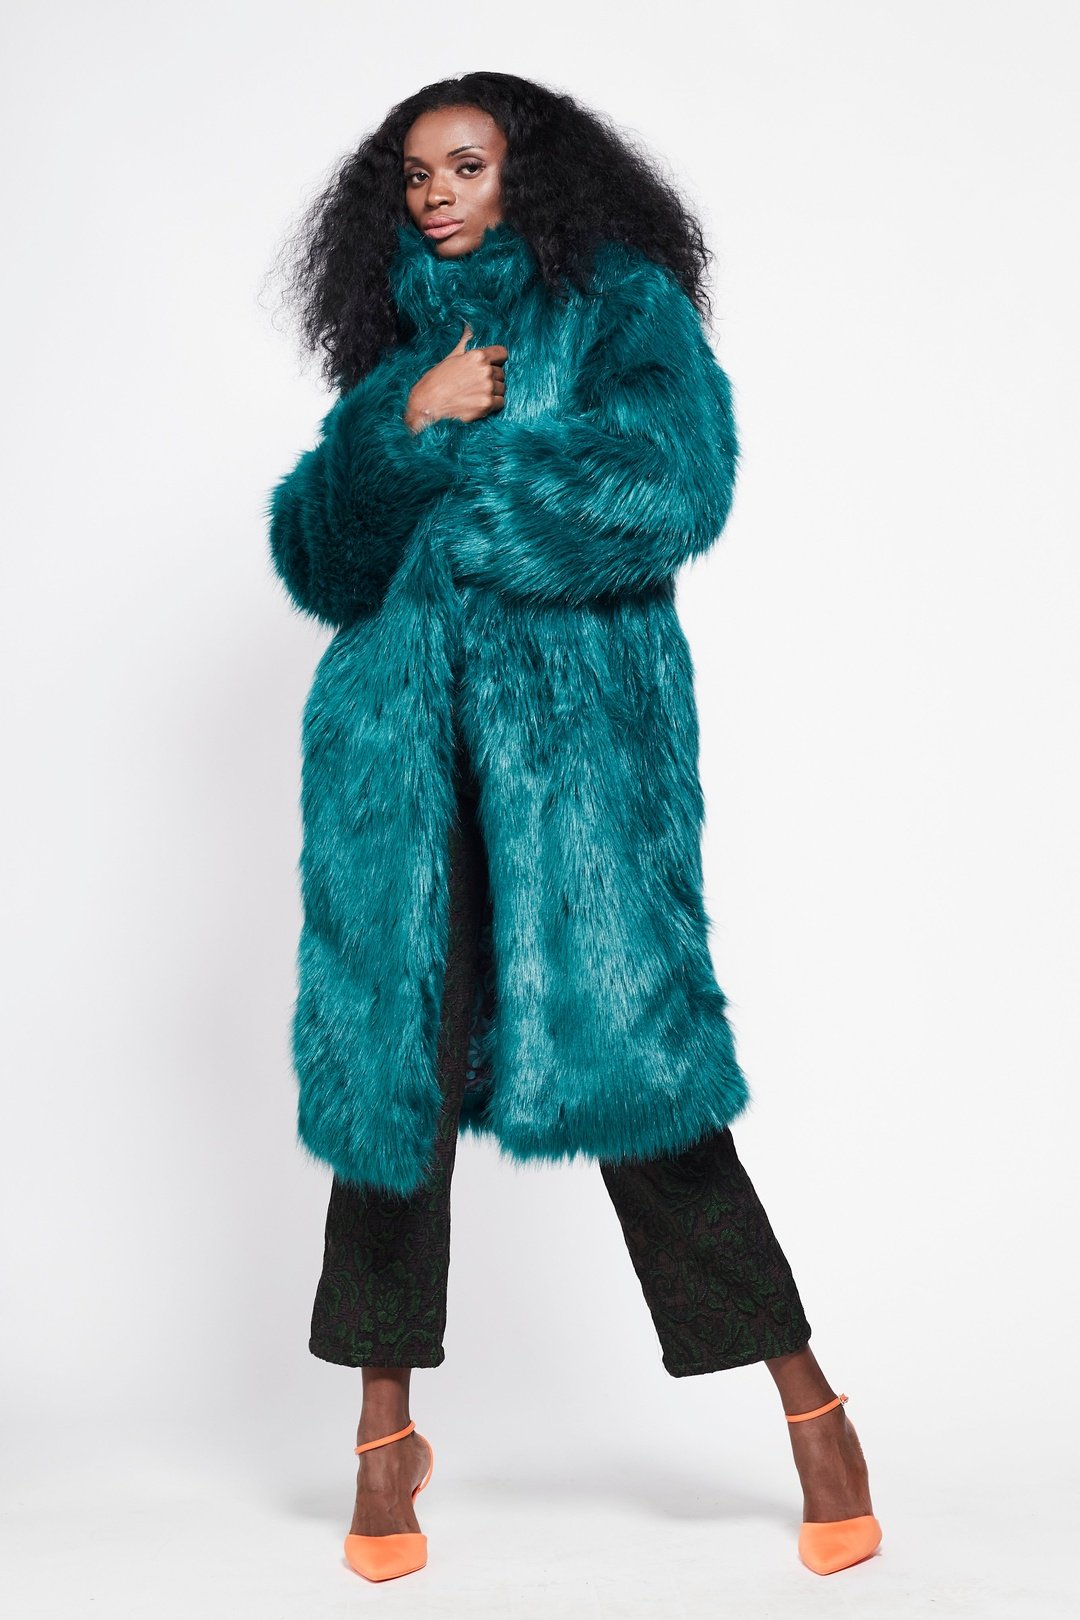 BUFFY Faux Fur Coat in Teal – OOTO CLOTHING